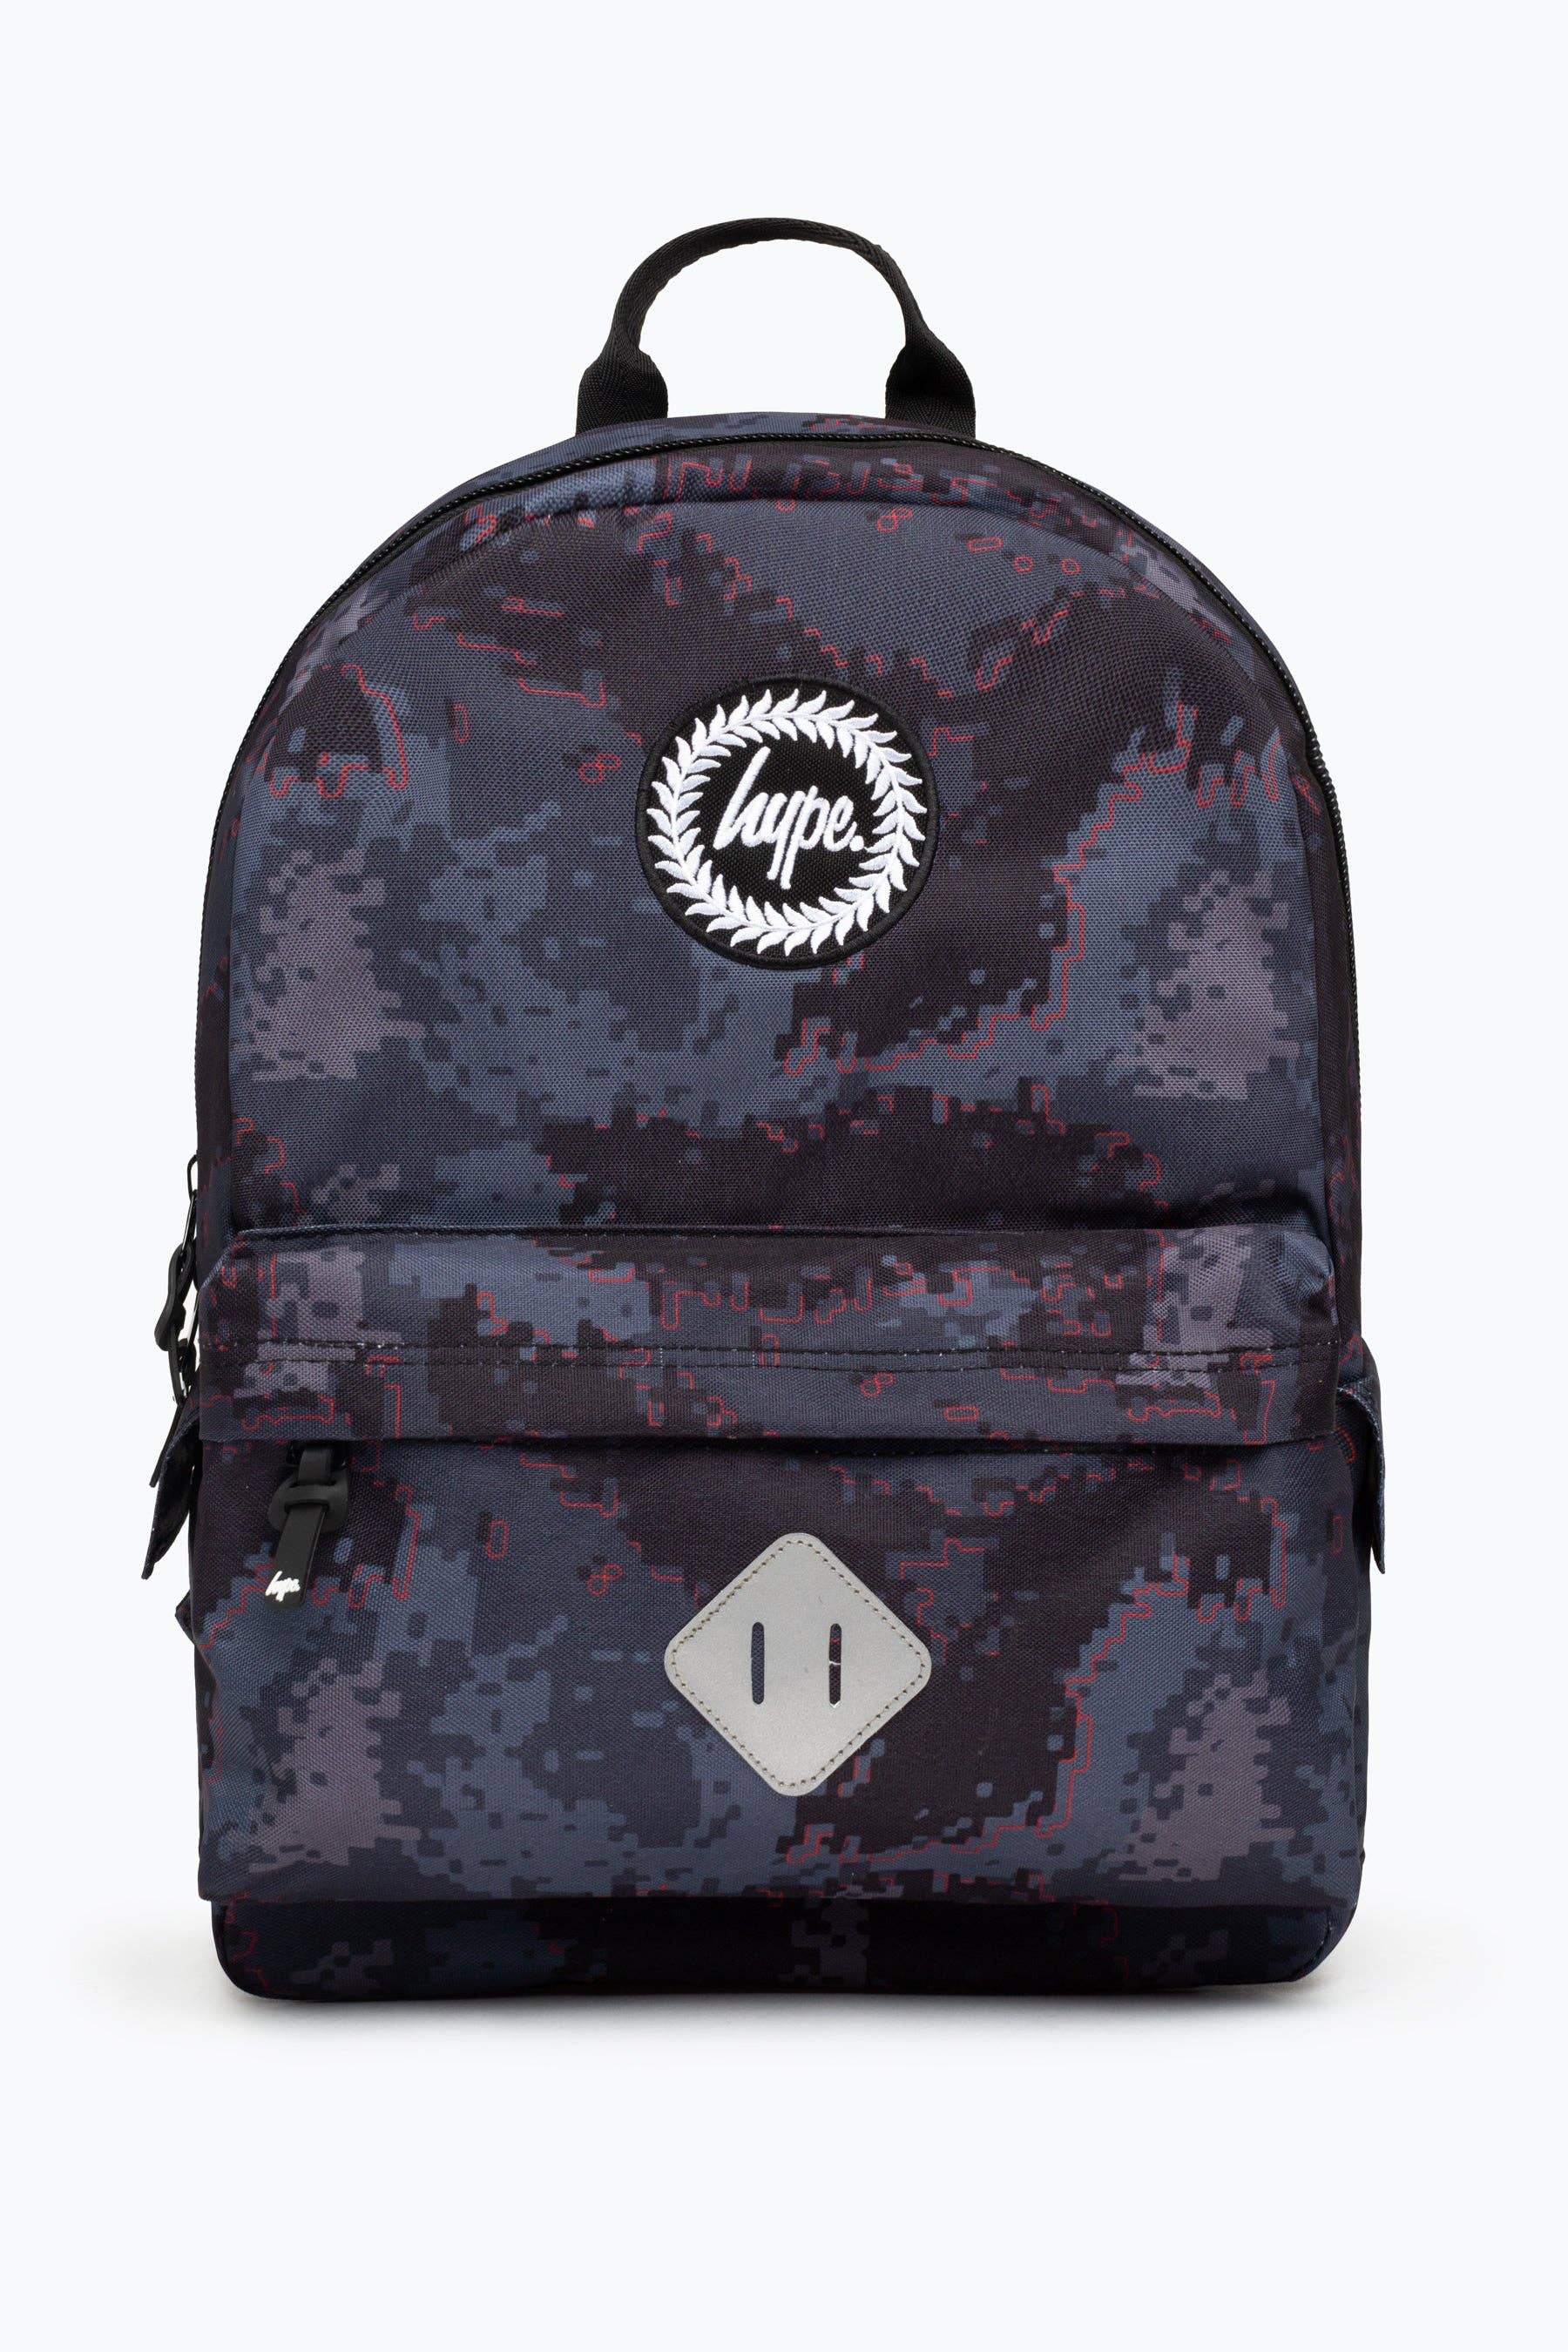 Hype Backpack Rucksack Bag School Bags New Designs For 2019 Delivers Fast Purple 